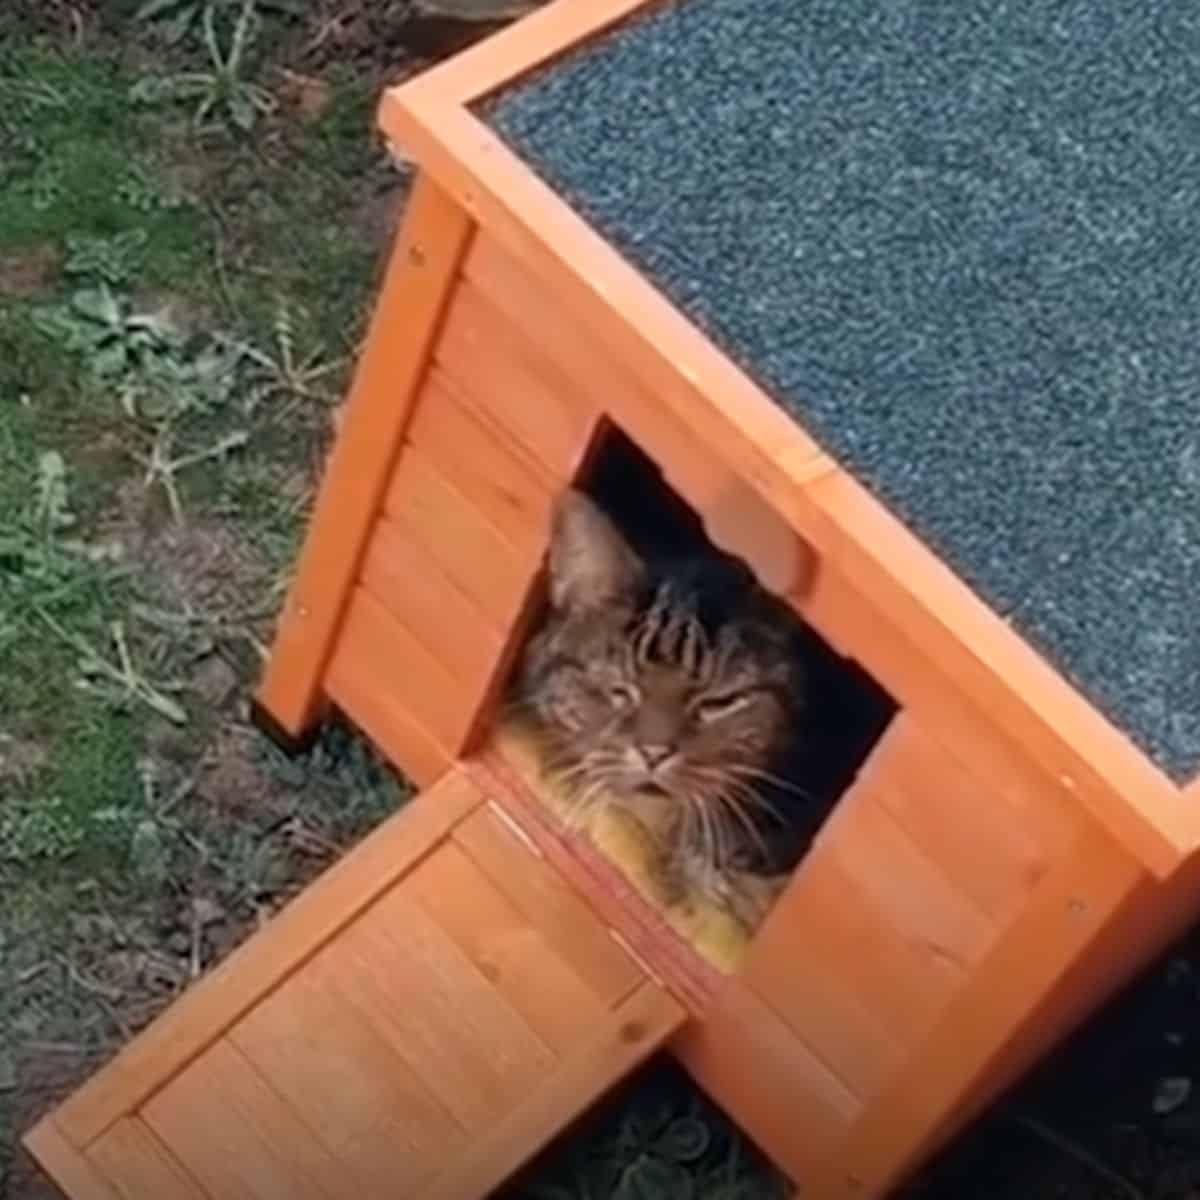 the cat peeks out of the box